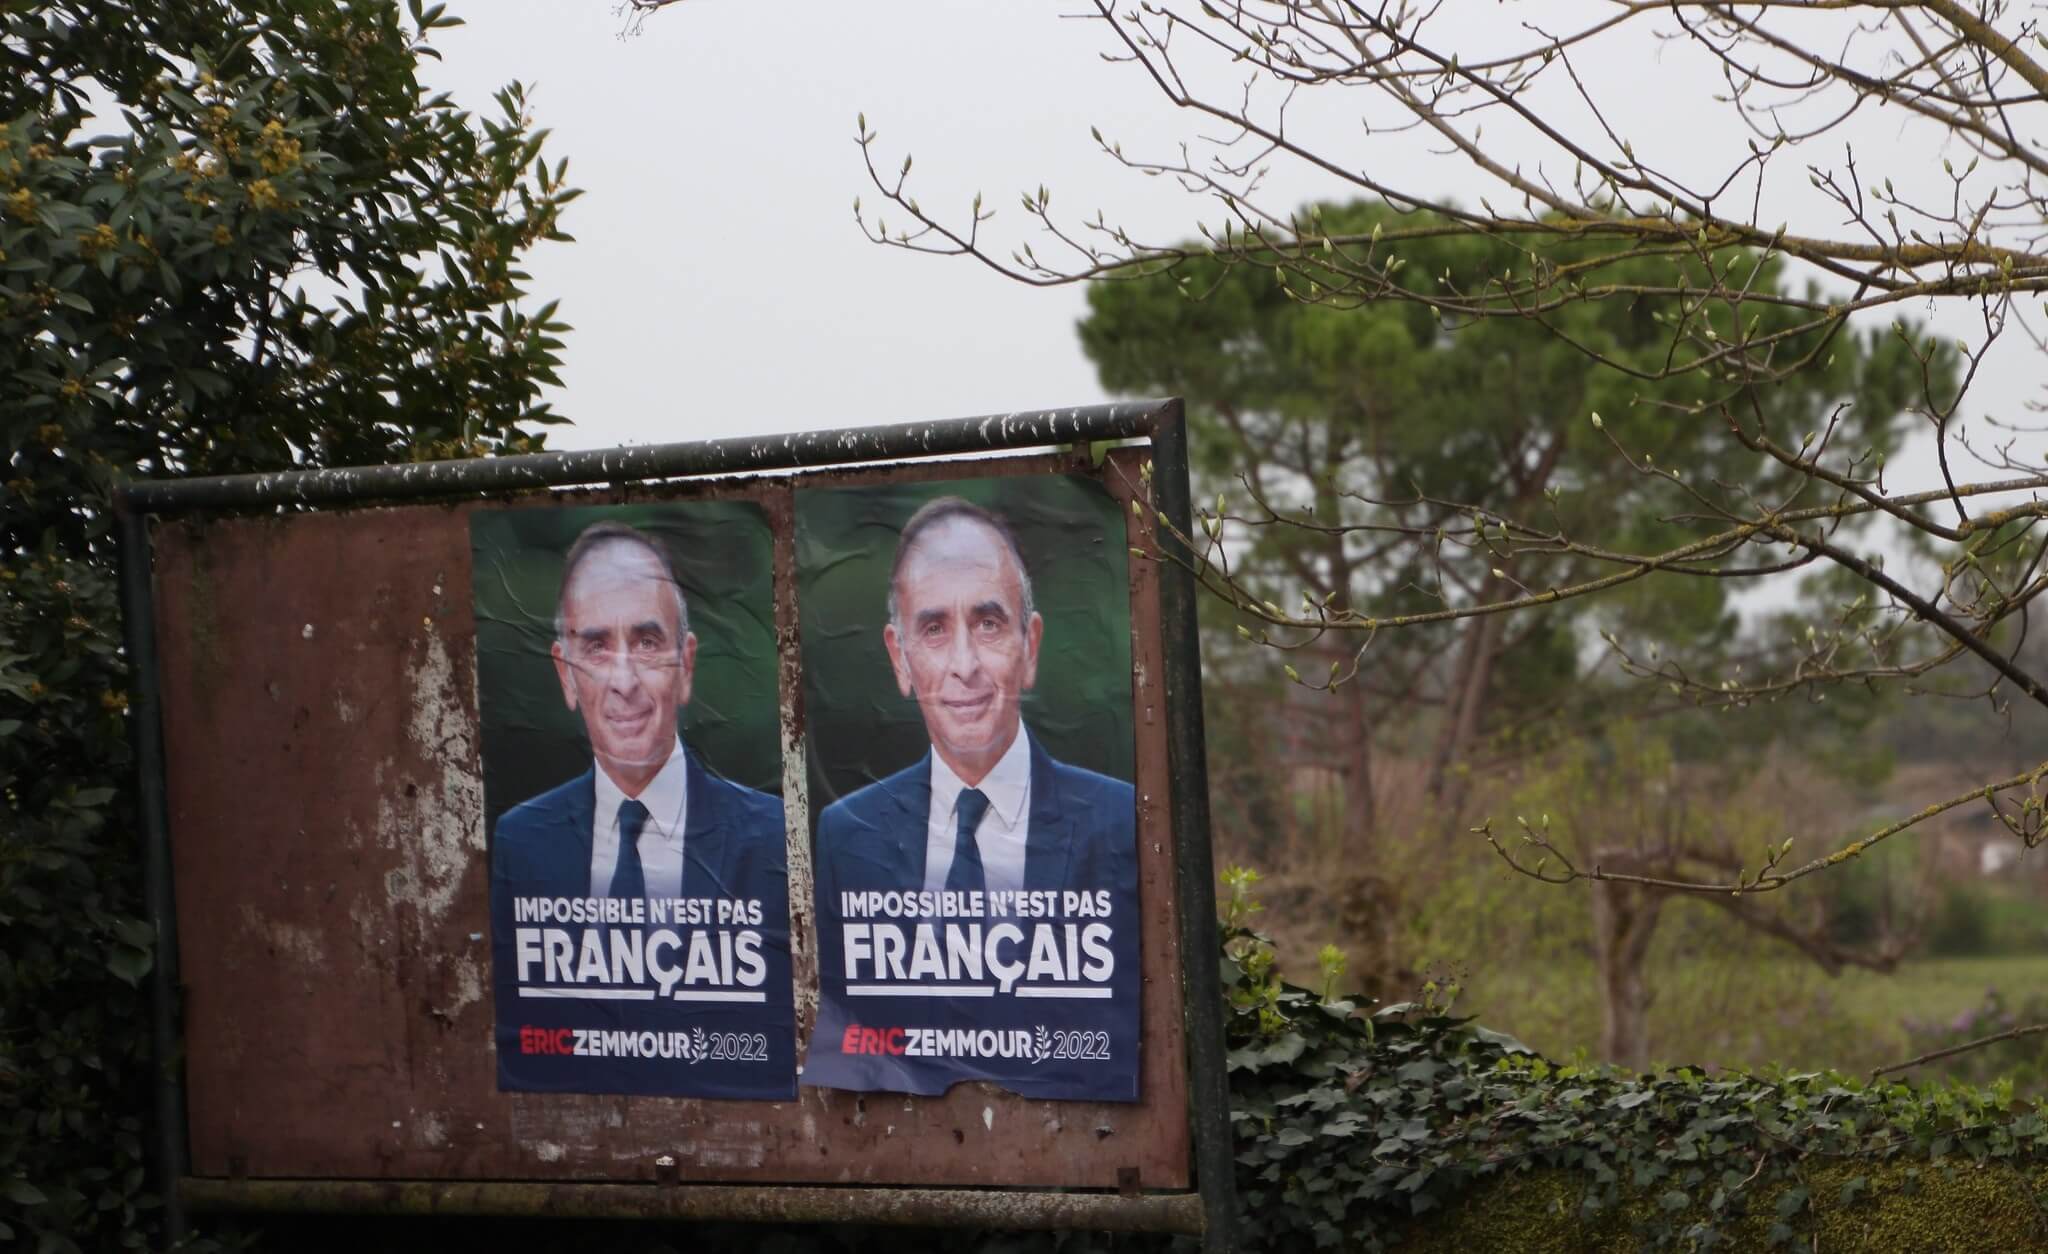 Eric Zemmour’s election woes